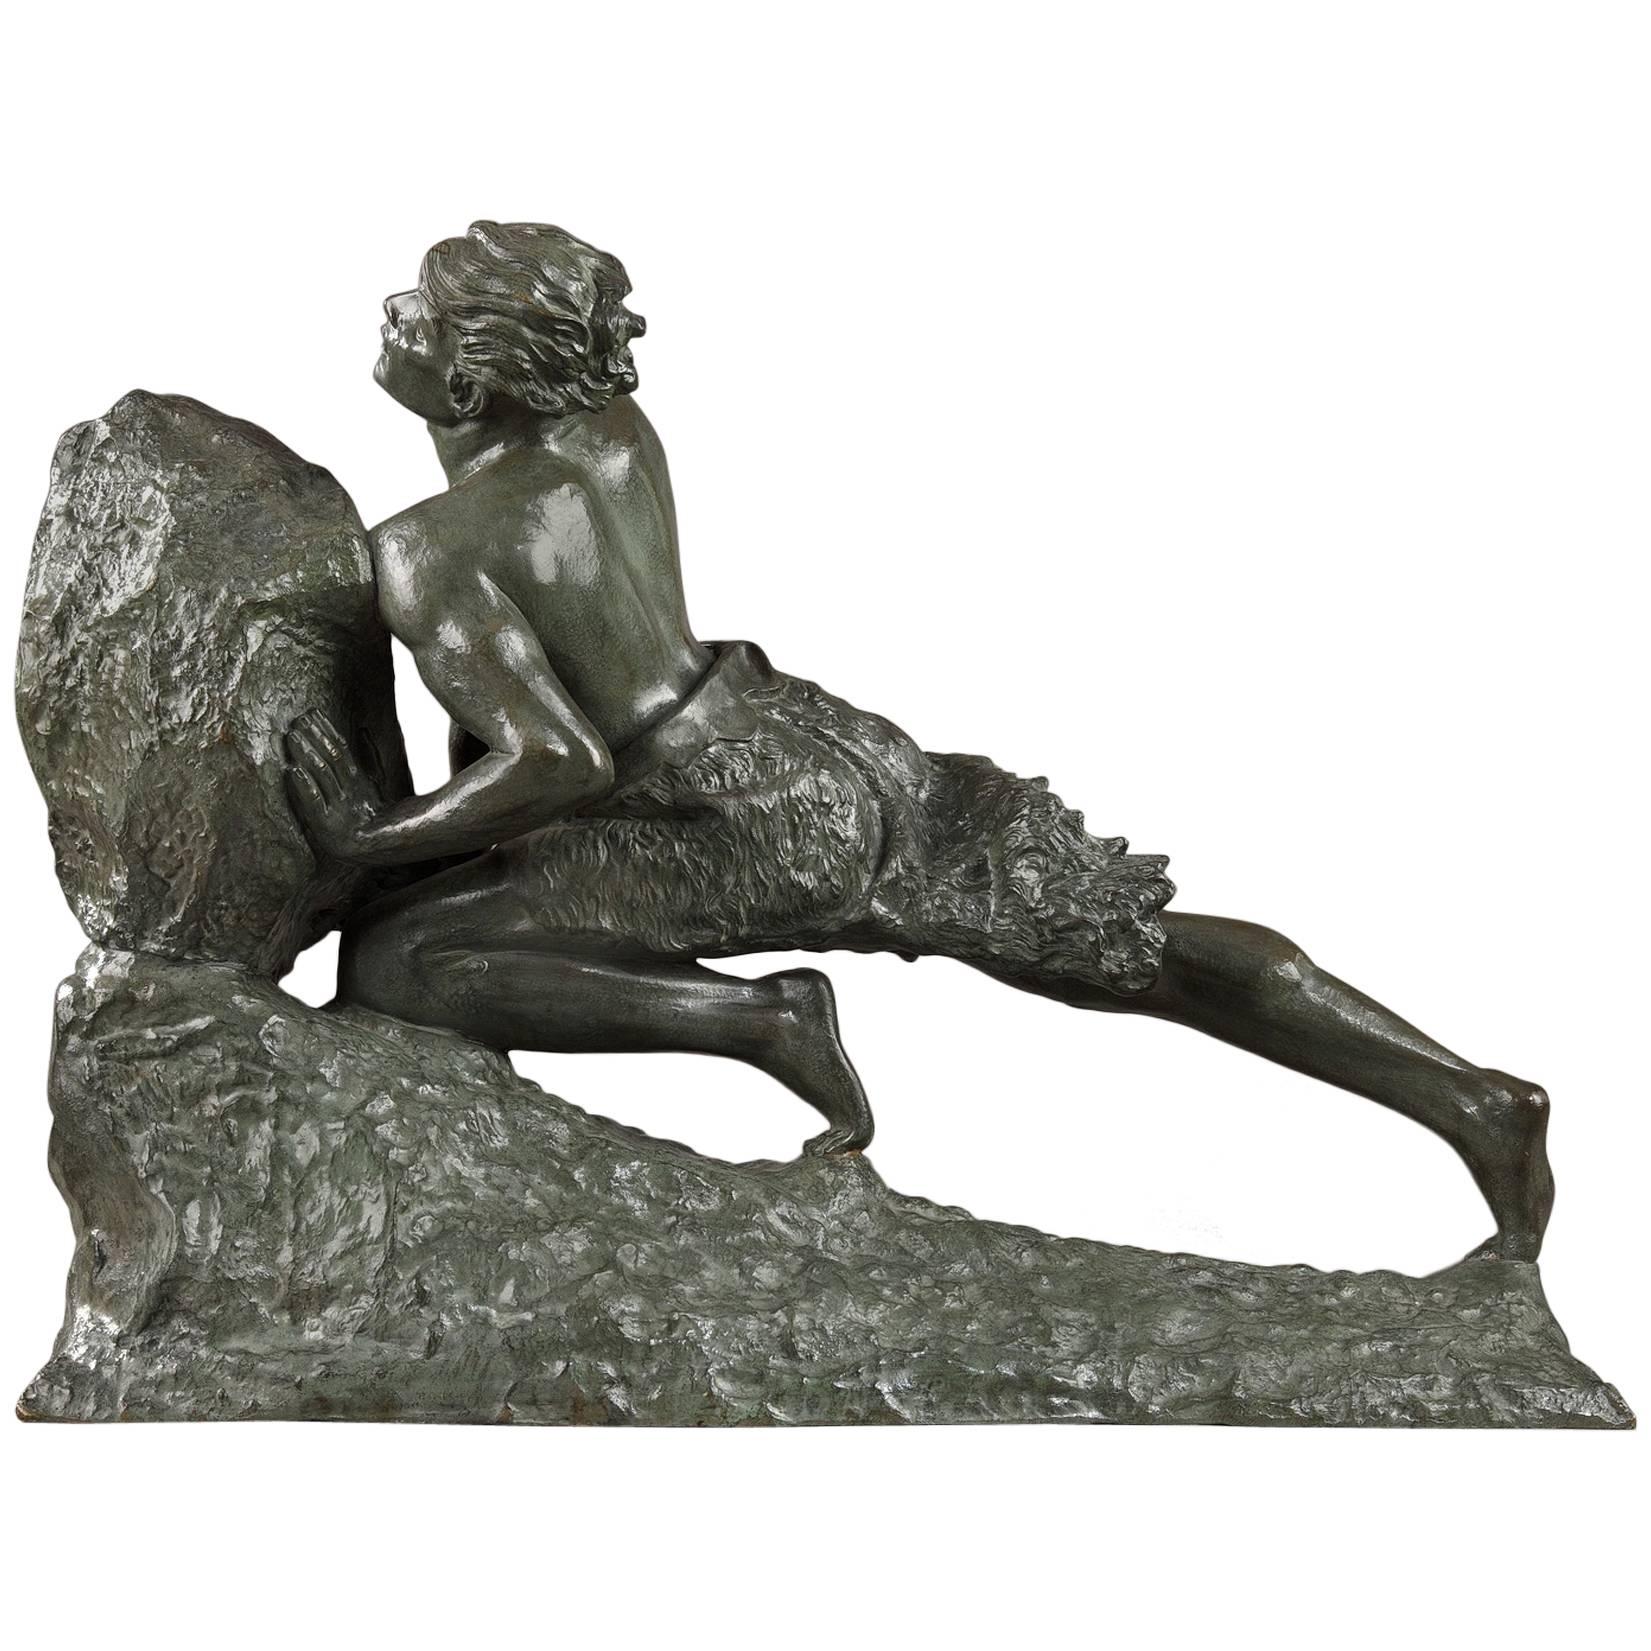 Bronze Sculpture, "The Myth of Sisyphus" by Emile Gregoire